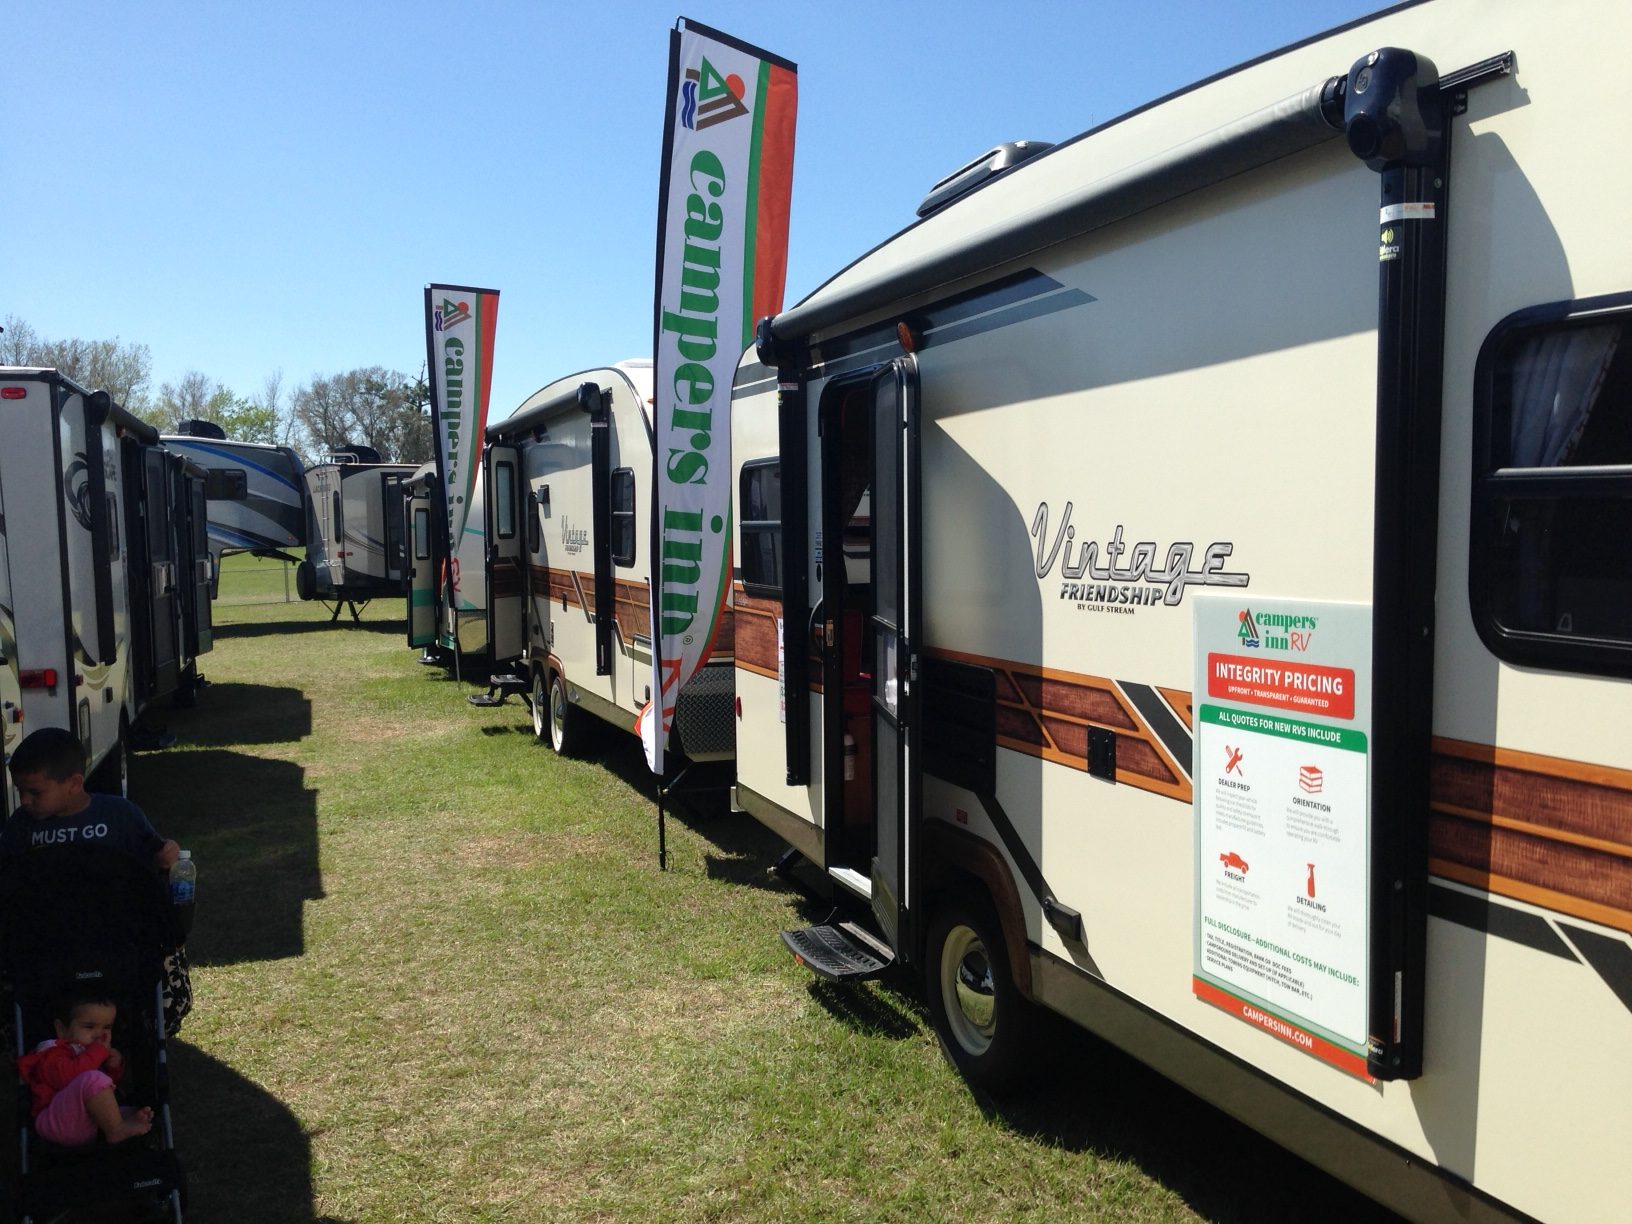 See your next Gulf Stream Coach RV at one of the RV Shows near you